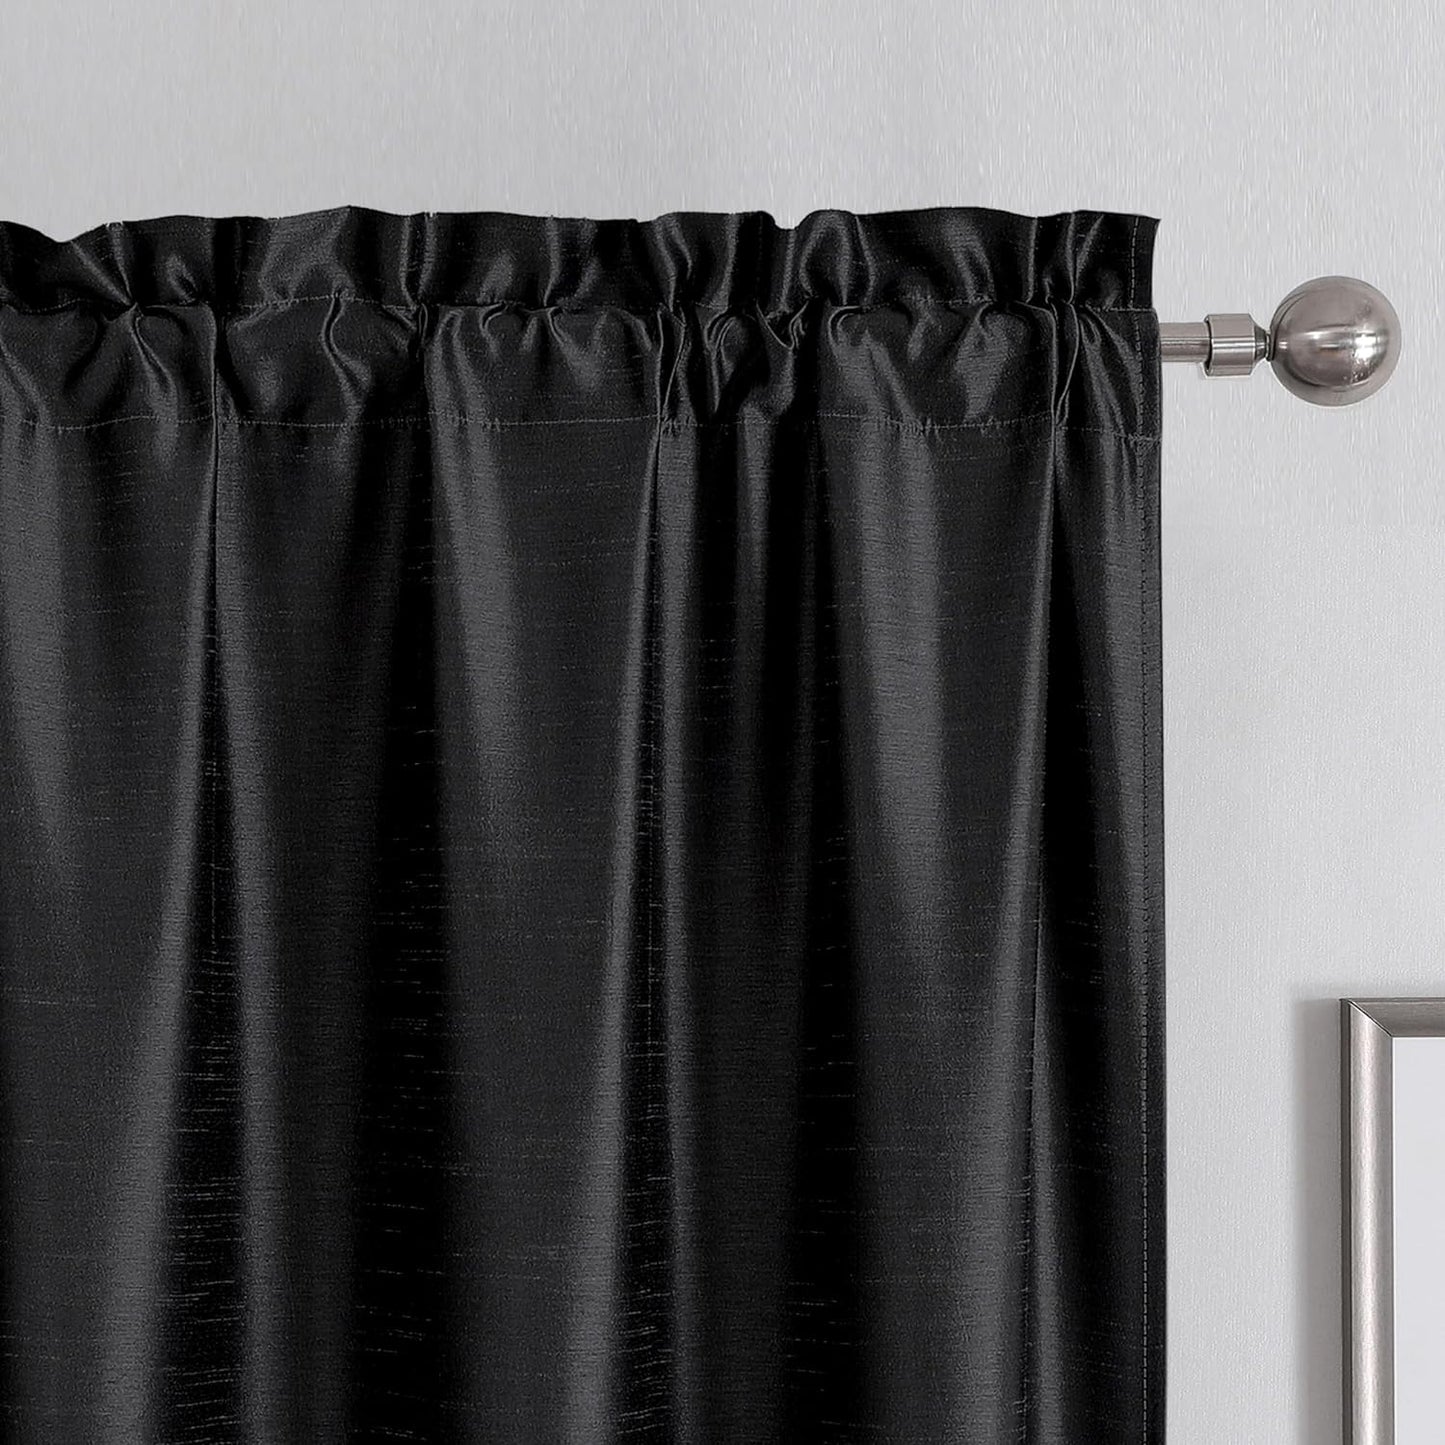 Chyhomenyc Uptown Sage Green Kitchen Curtains 45 Inch Length 2 Panels, Room Darkening Faux Silk Chic Fabric Short Window Curtains for Bedroom Living Room, Each 30Wx45L  Chyhomenyc Black 2X30"Wx54"L 